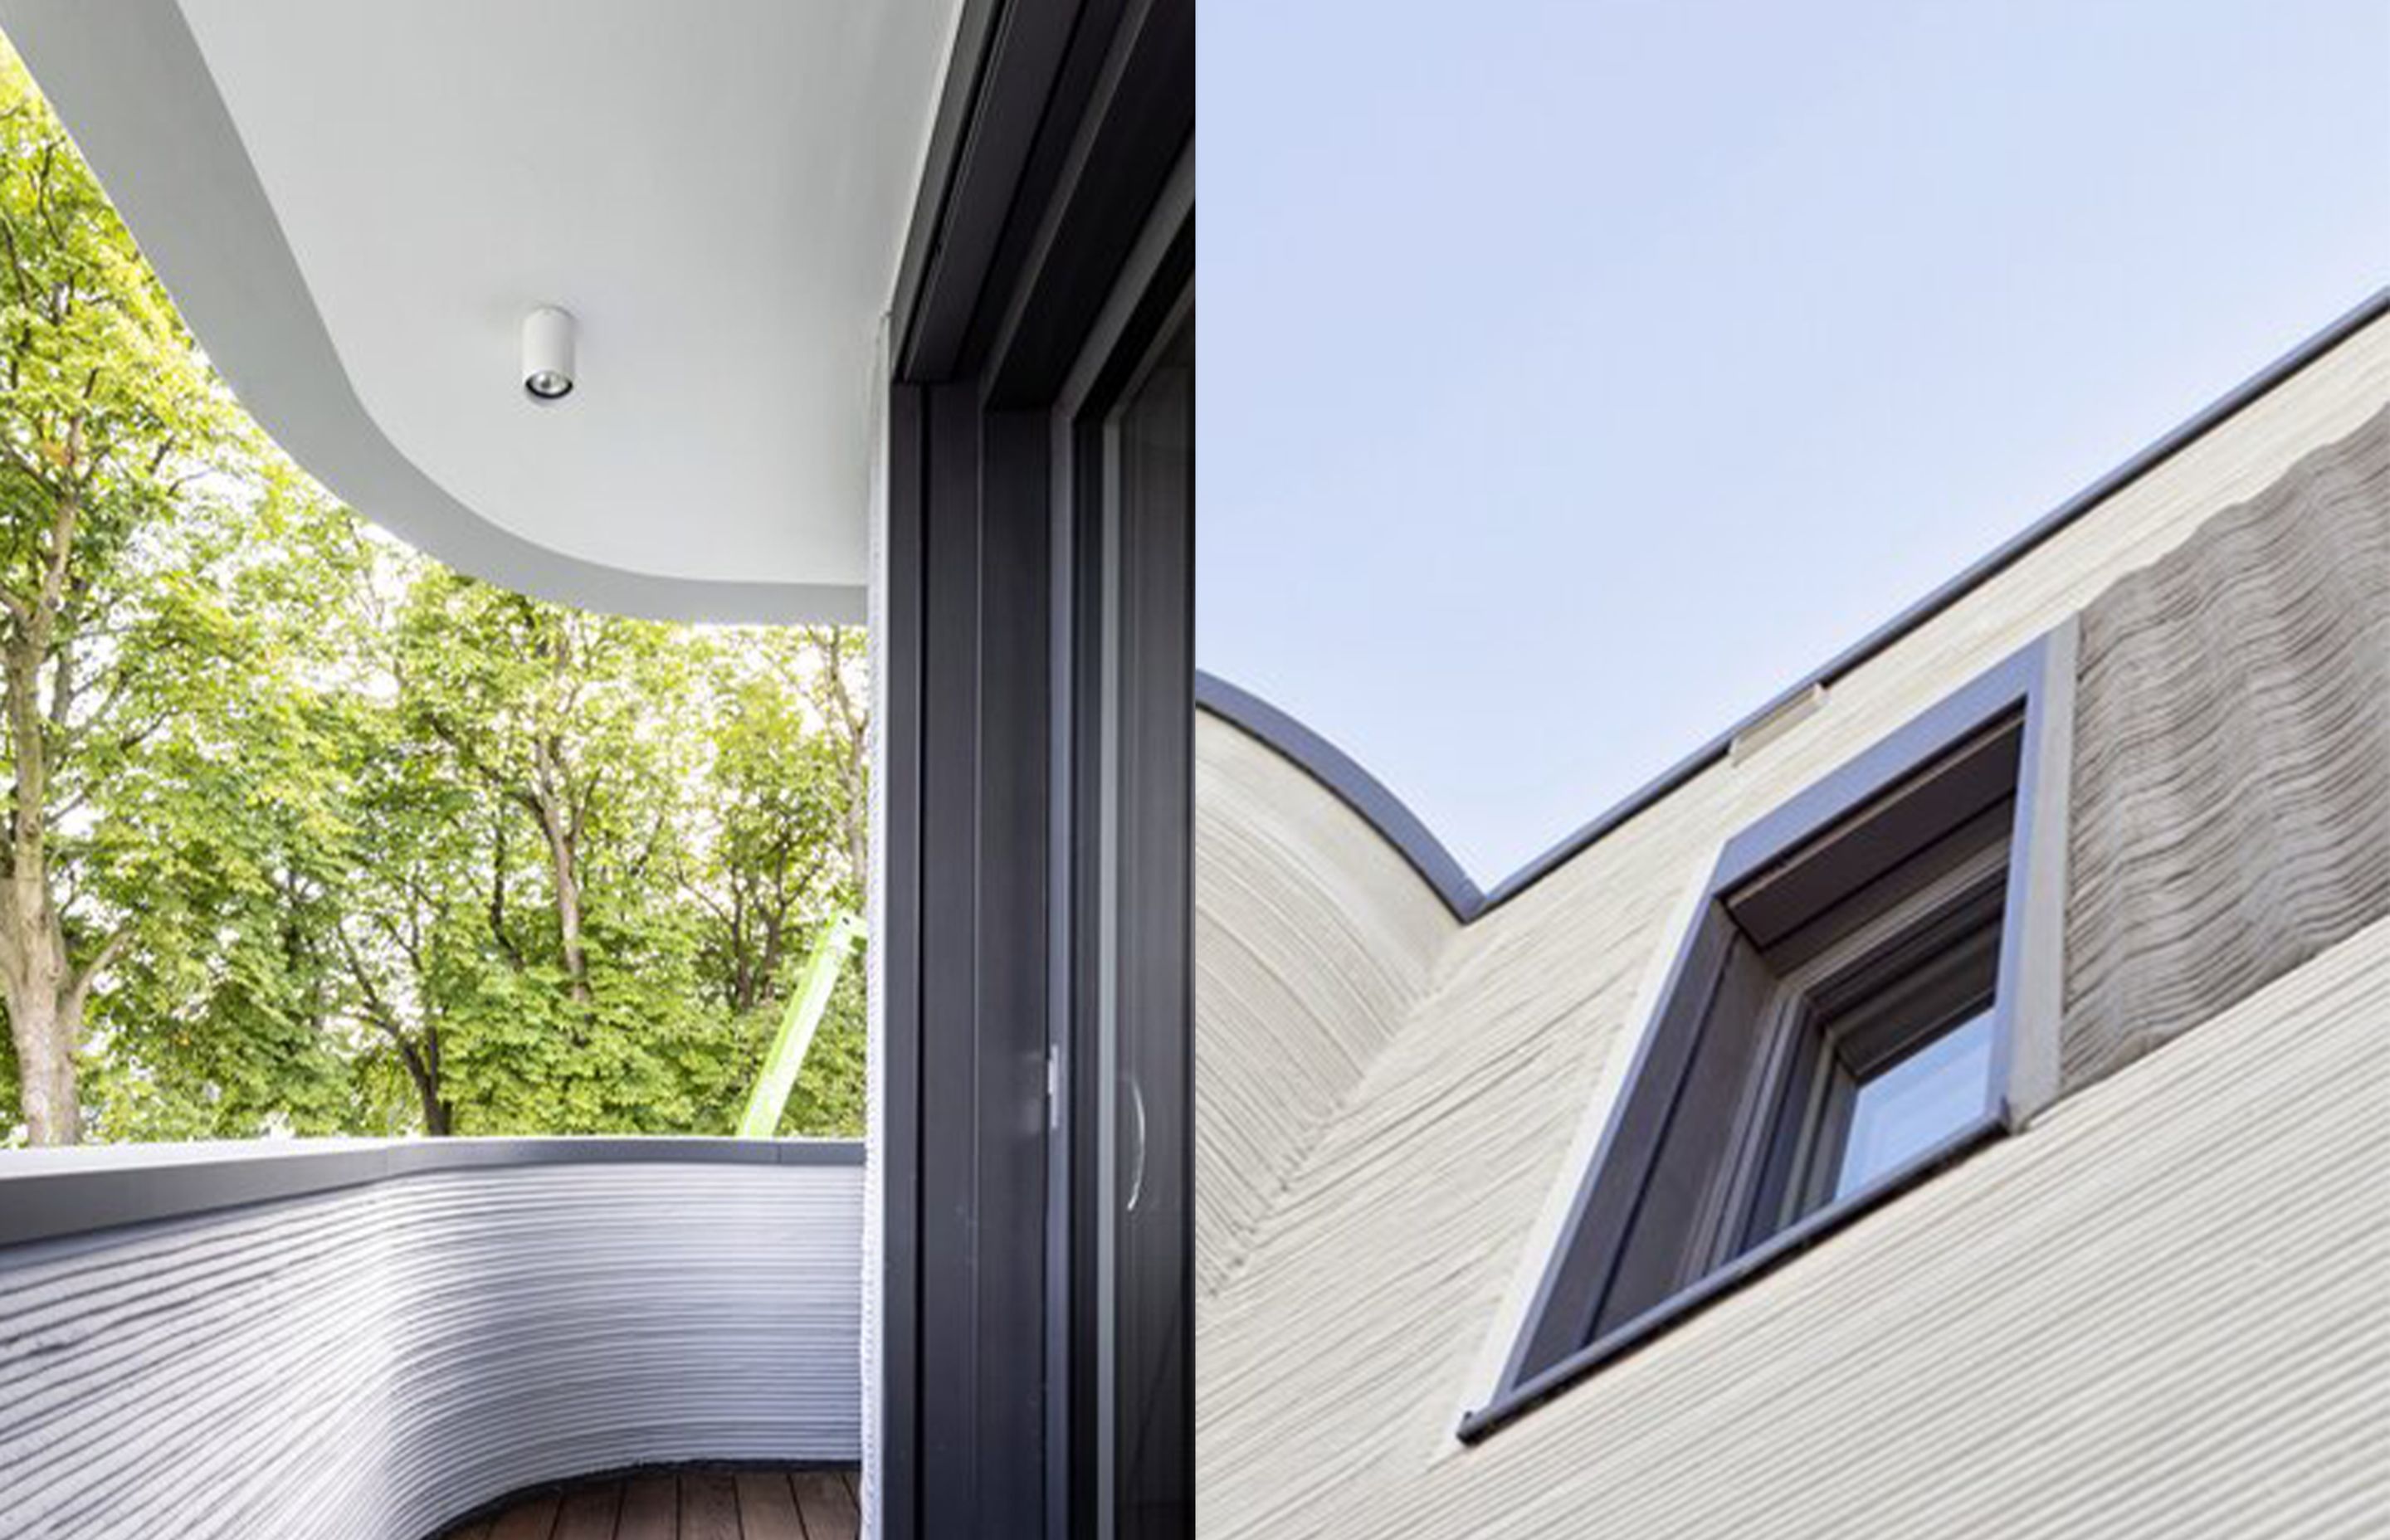 Germany's first printed home has a bath by Bette